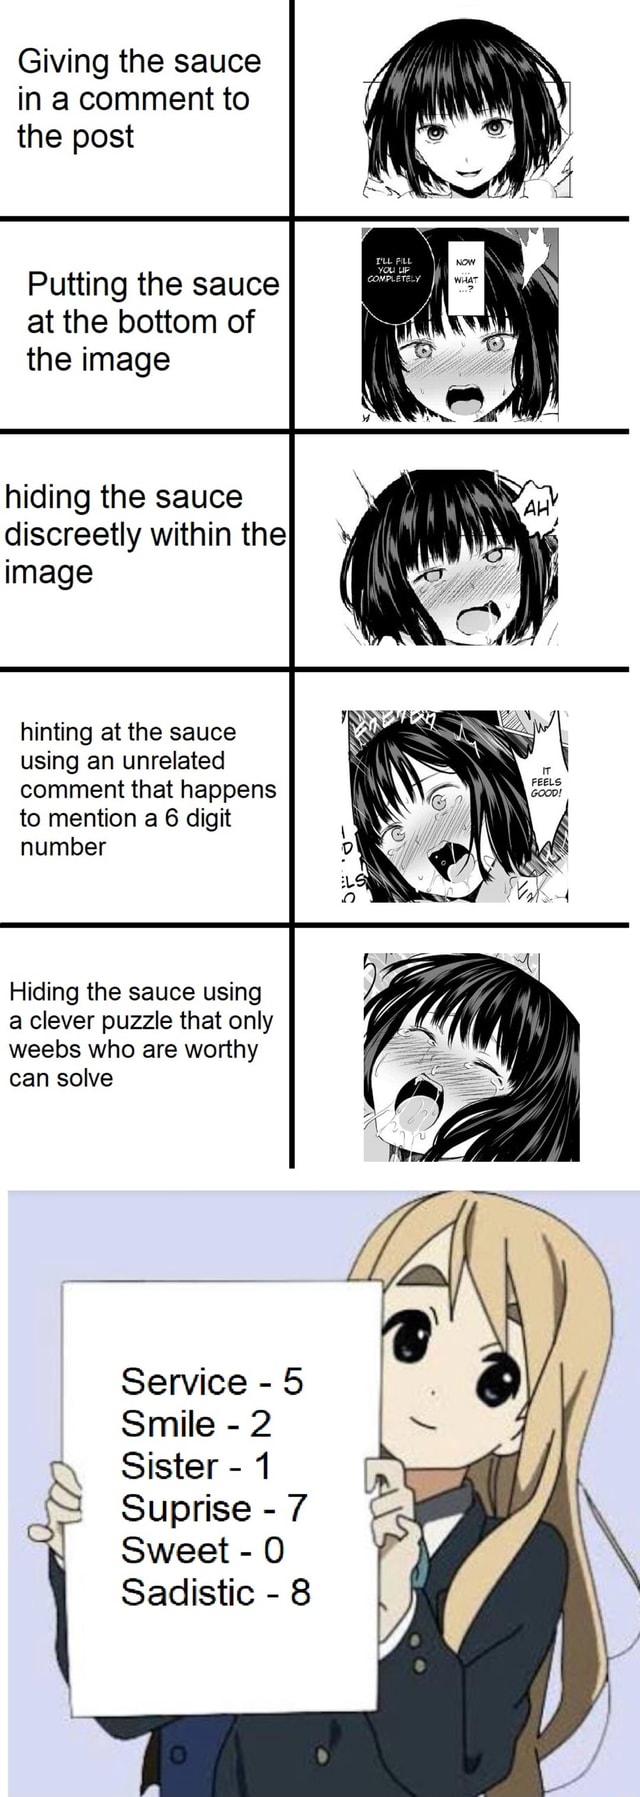 Giving the sauce in a comment to the post Putting the sauce at the bottom  of the image hiding the sauce discreetly within the image hinting at the  sauce using an unrelated